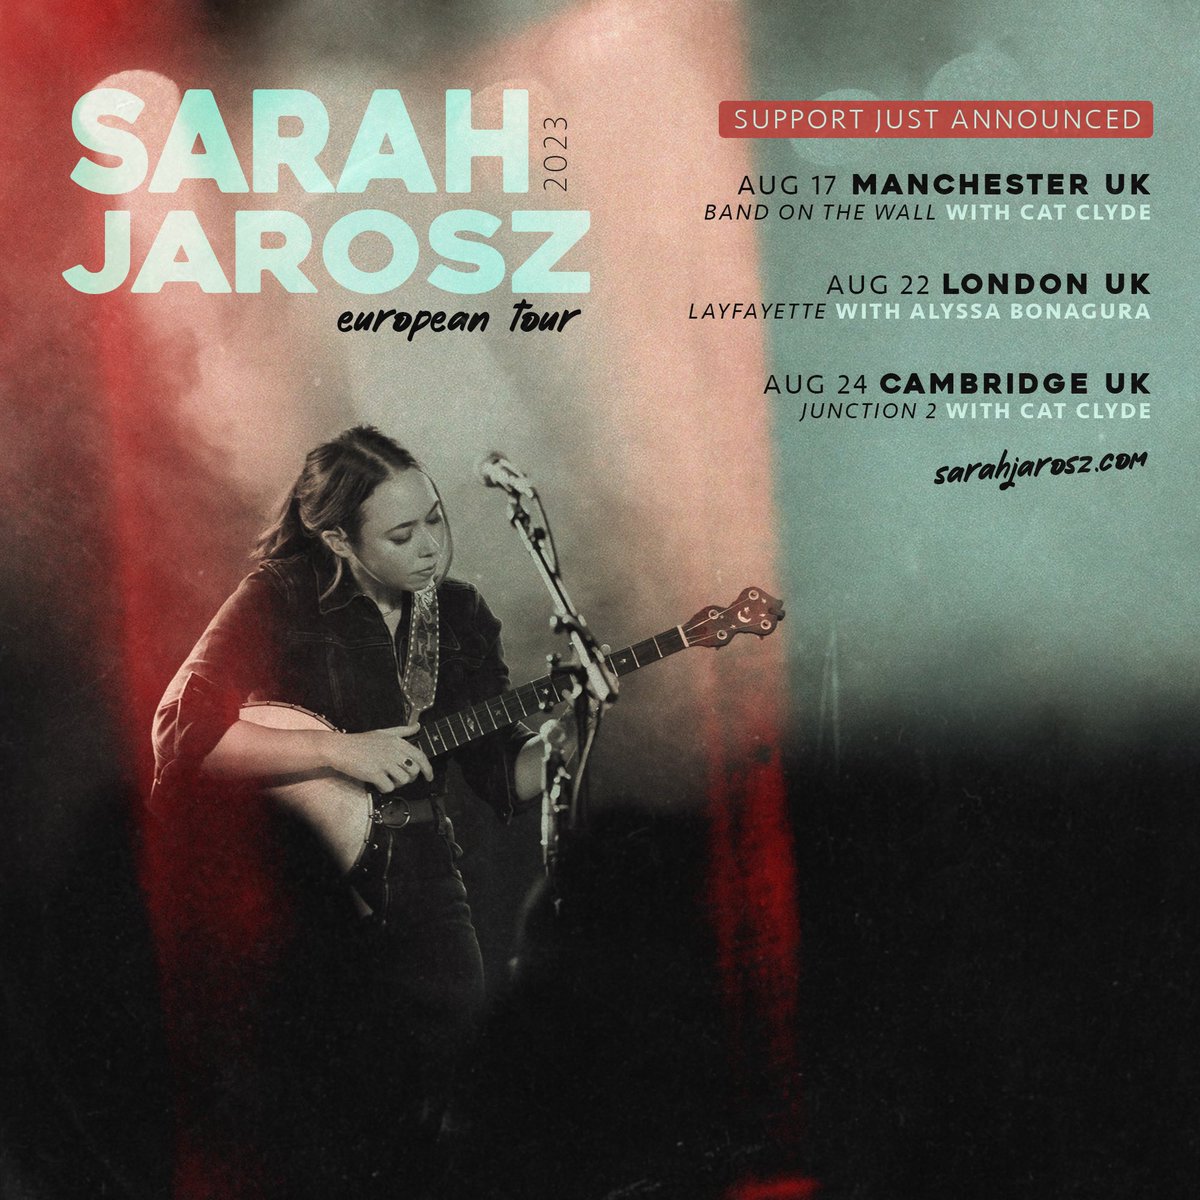 Happy to announce support for a few of my upcoming UK shows in August. These lovely folks will be kicking off three of the shows. Head to my website to see the full list of UK and Denmark dates! sarahjarosz.com